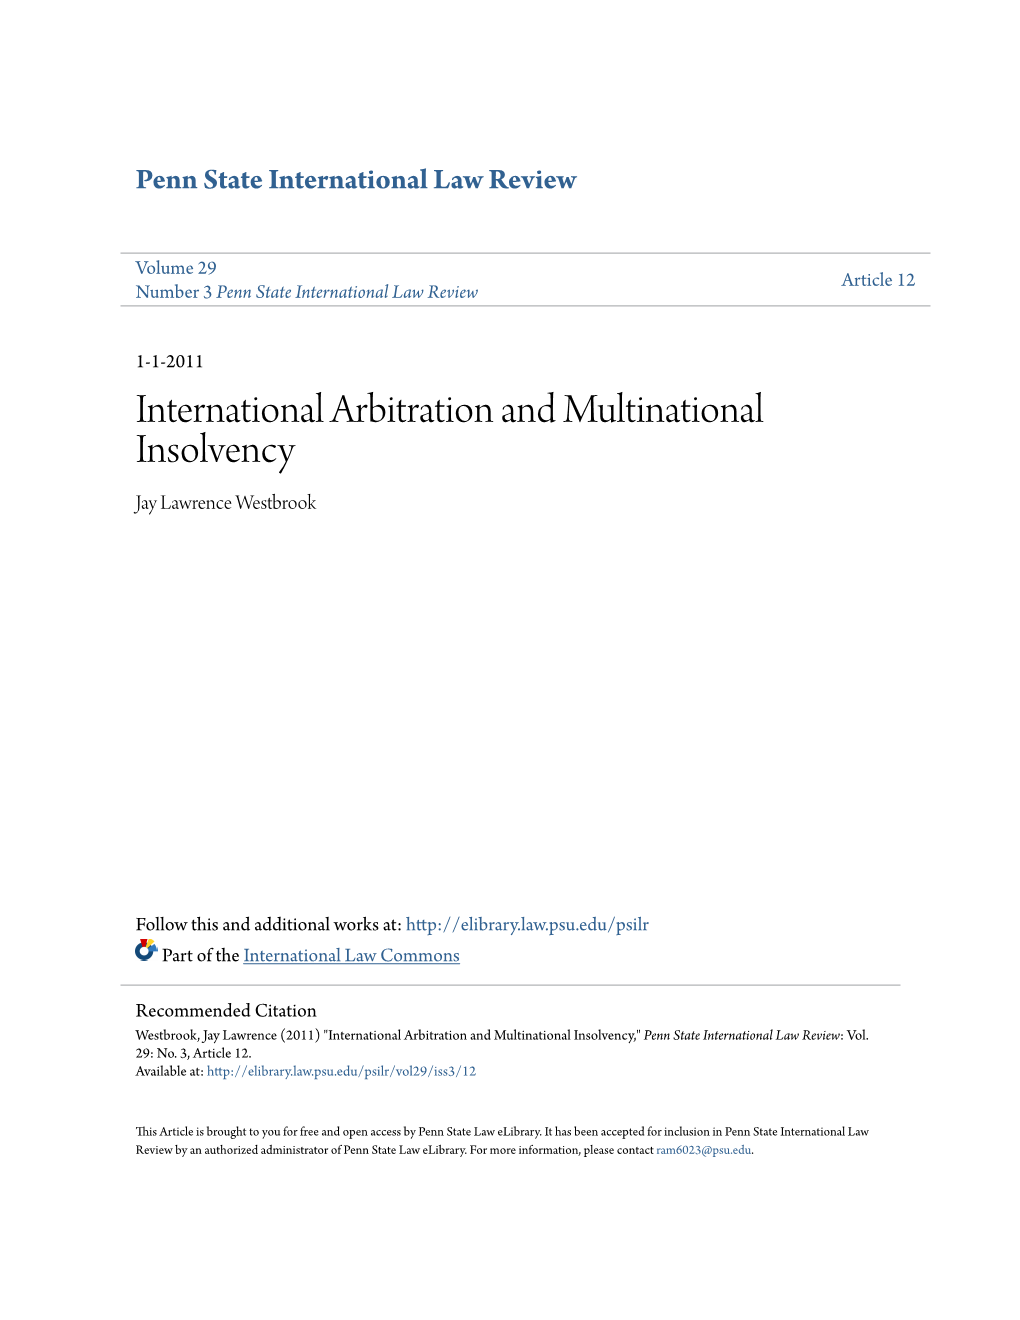 International Arbitration and Multinational Insolvency Jay Lawrence Westbrook